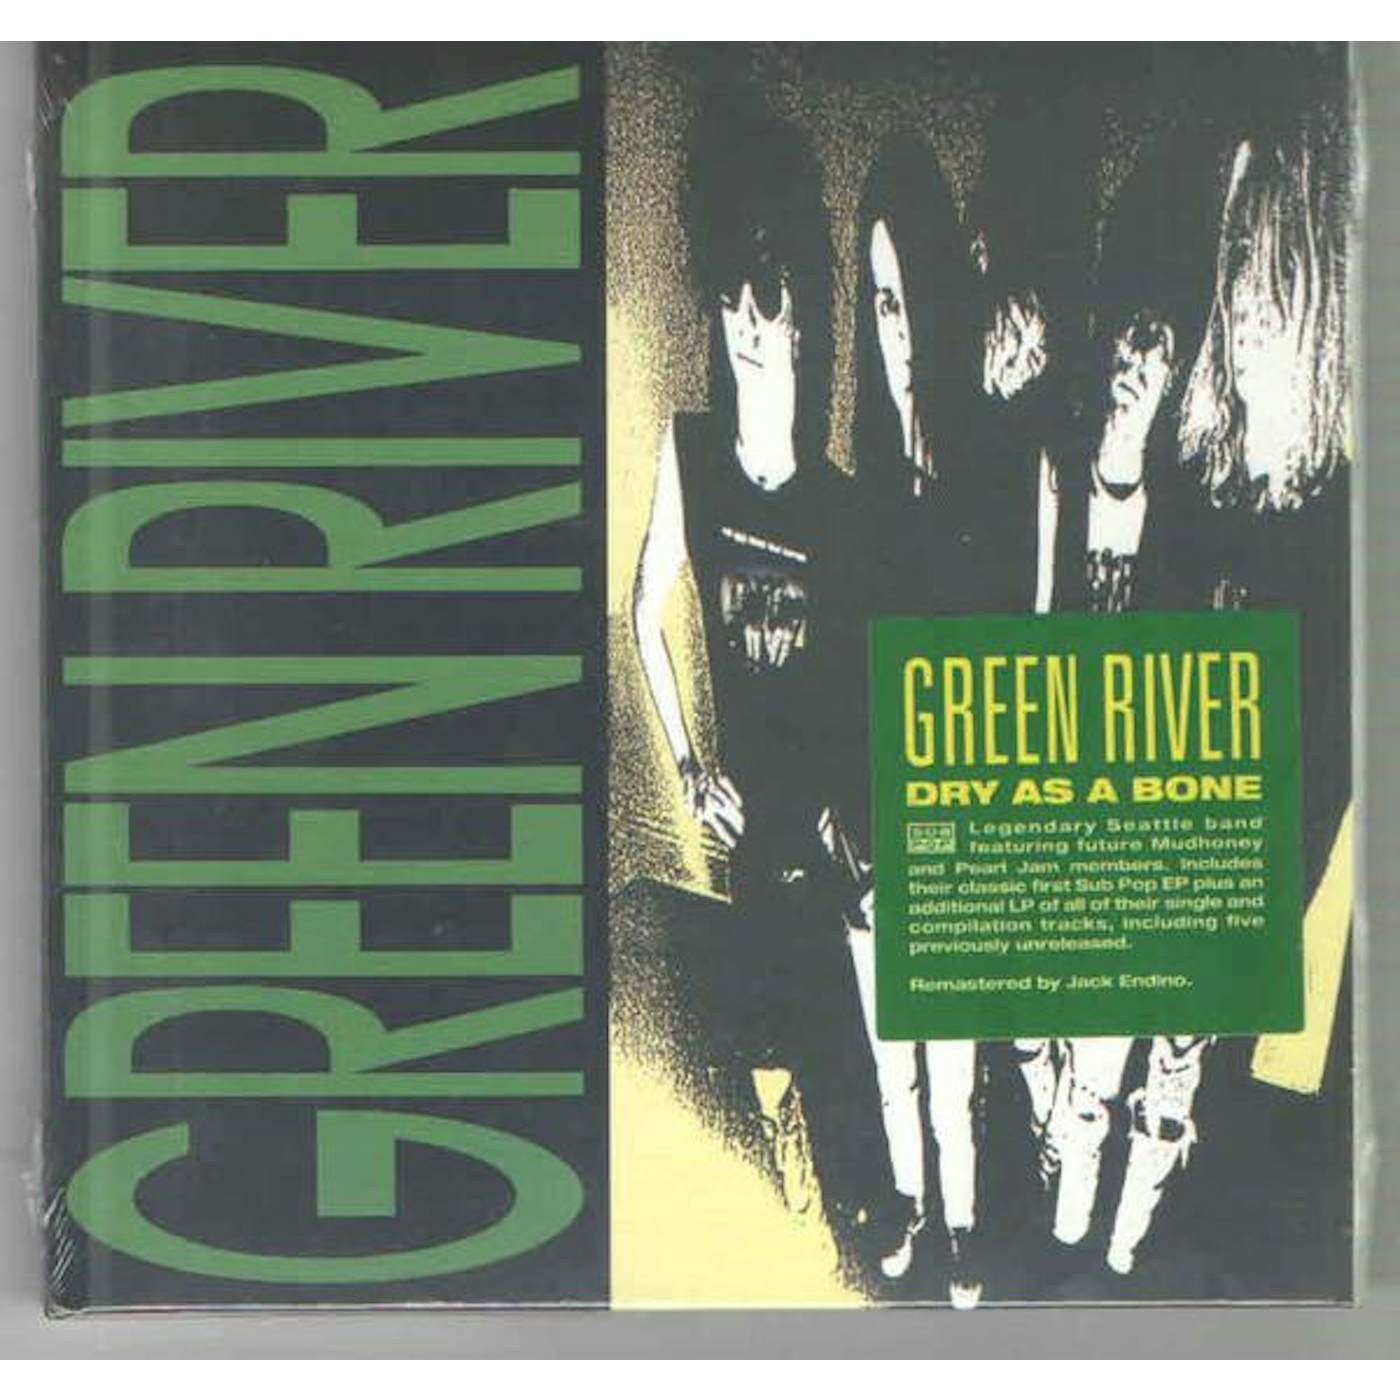 Green River DRY AS A BONE (DELUXE EDITION) CD